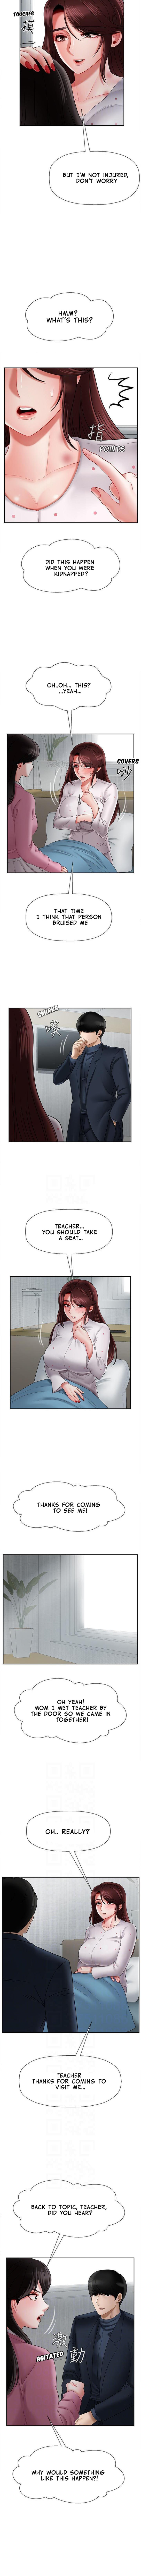 Physical Classroom - Chapter 16 Page 3